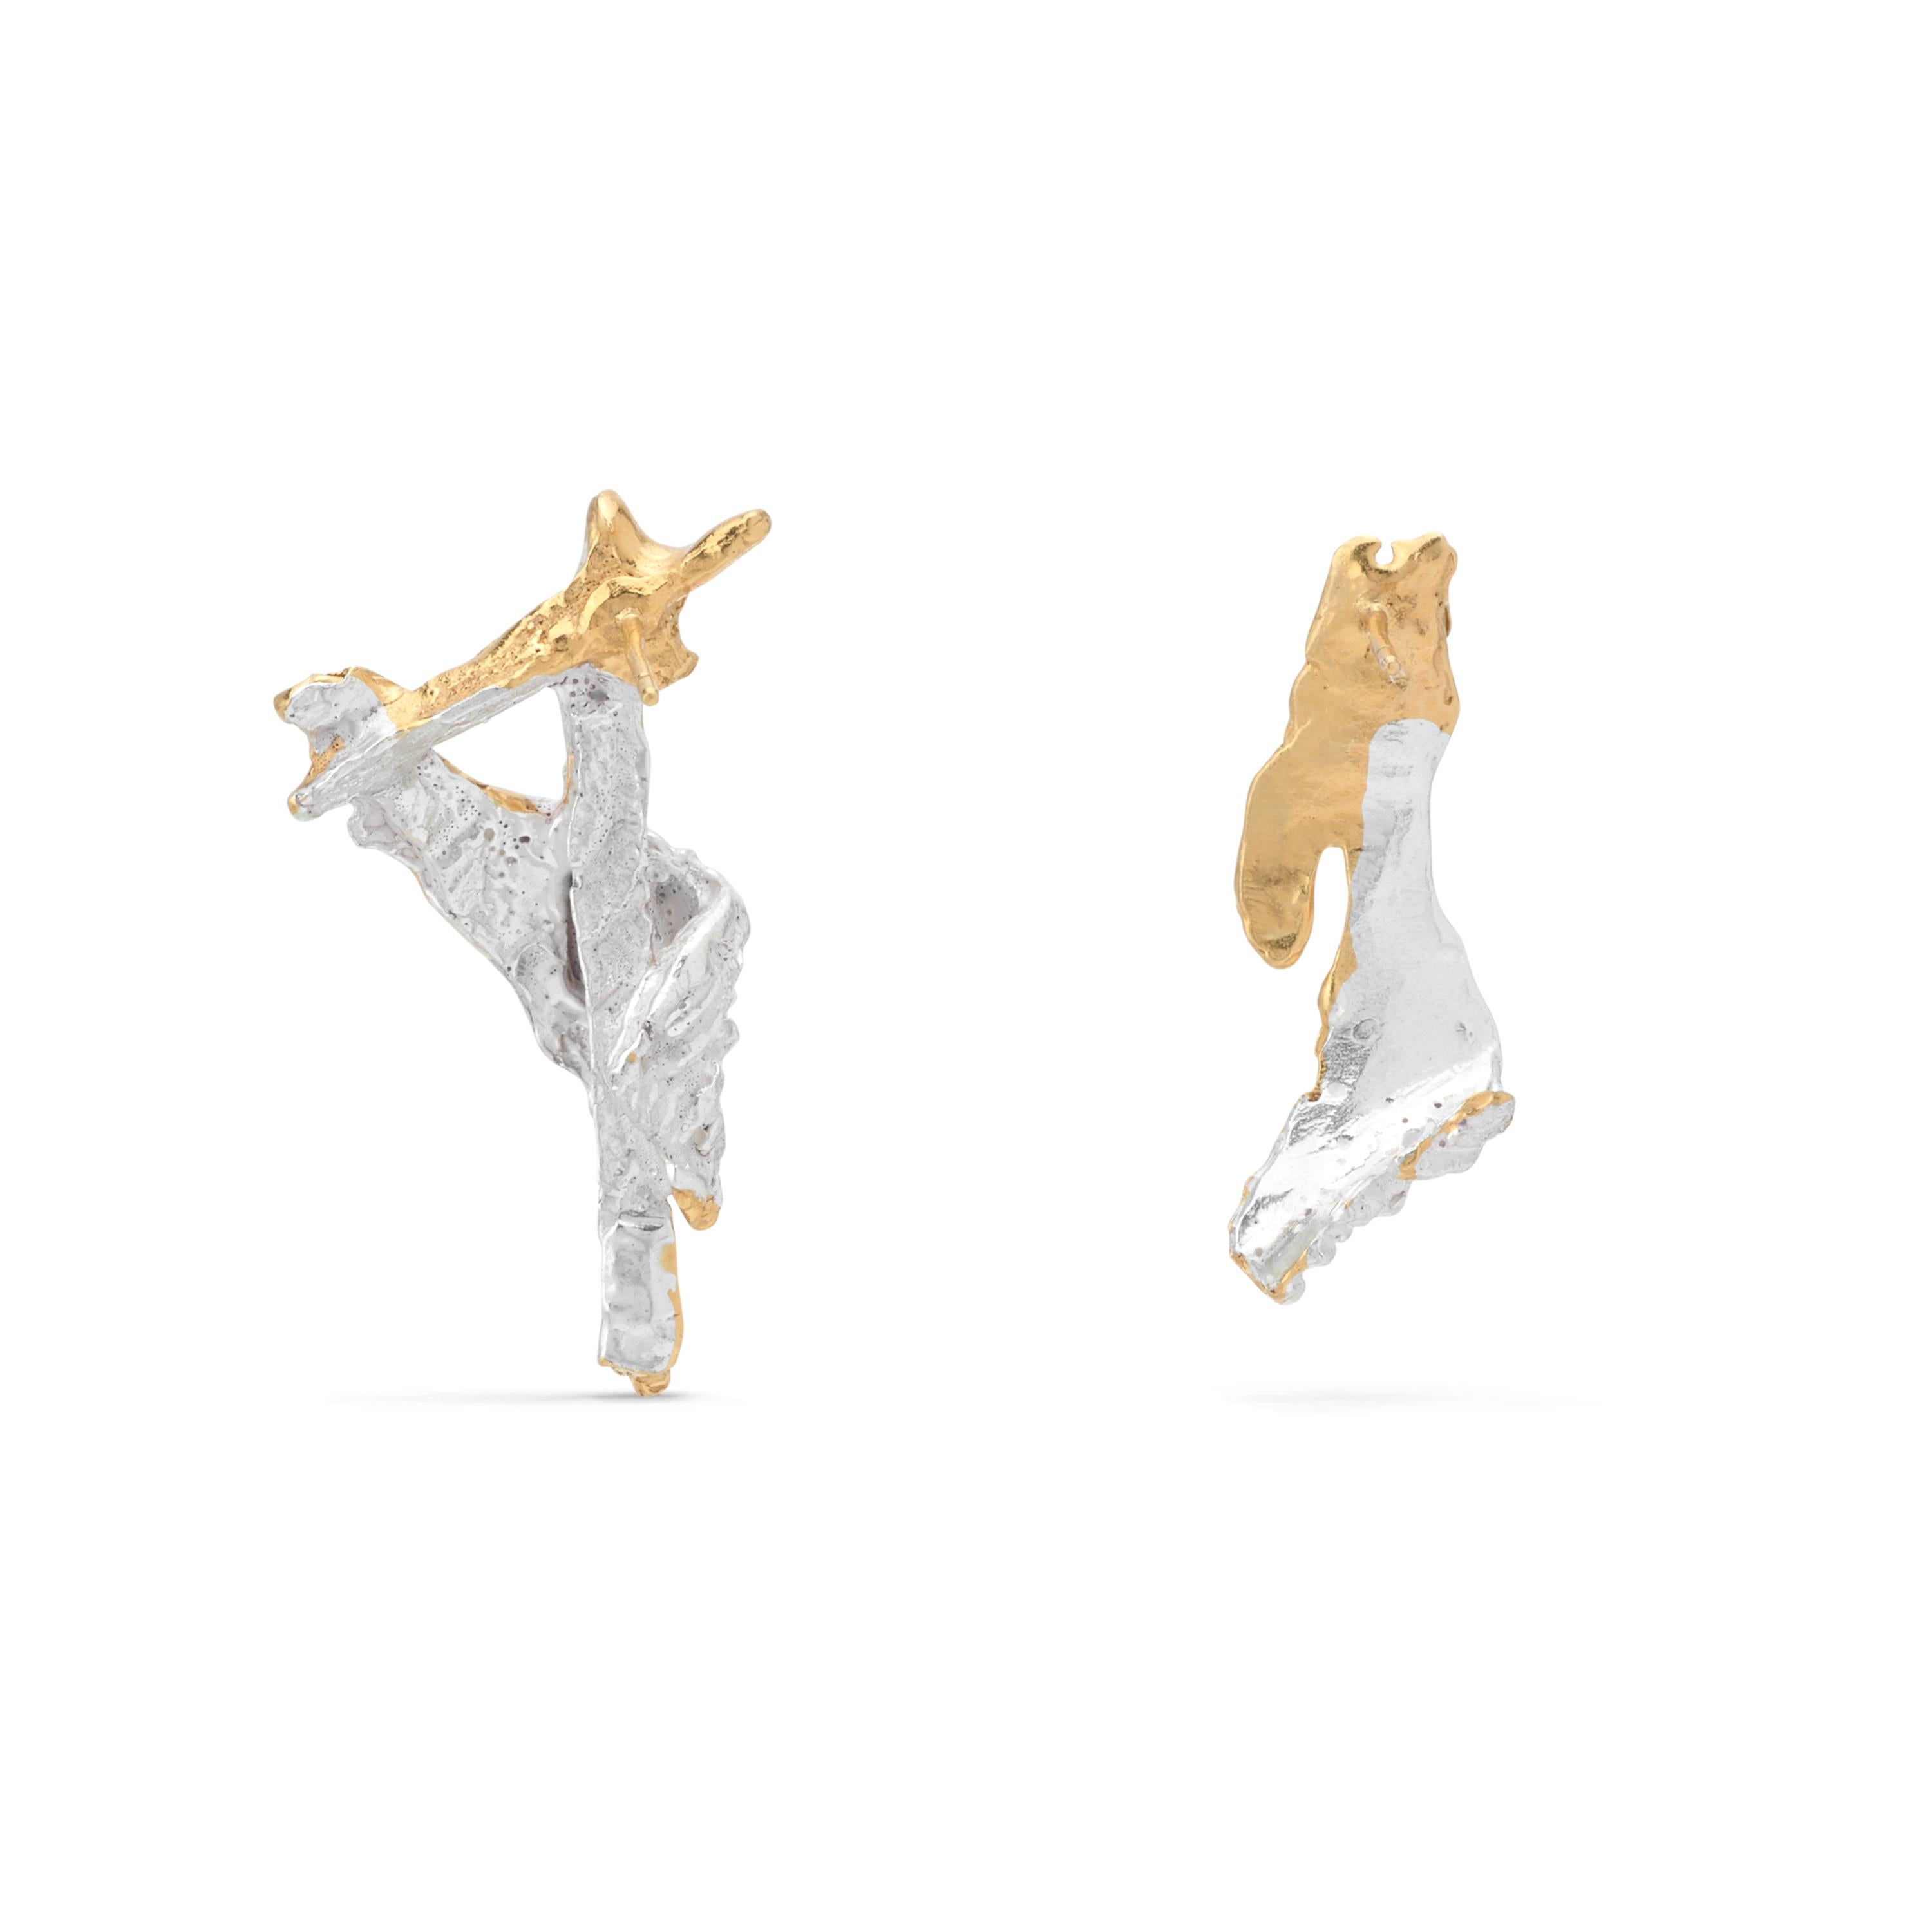 Afon is the Welsh word for river, and these stunning earrings are, like the paths of the ancient waterways of Wales, formed of an asymmetric beauty. Their bold, serpentine shapes ensure they’ll make a statement wherever or however they’re worn, but